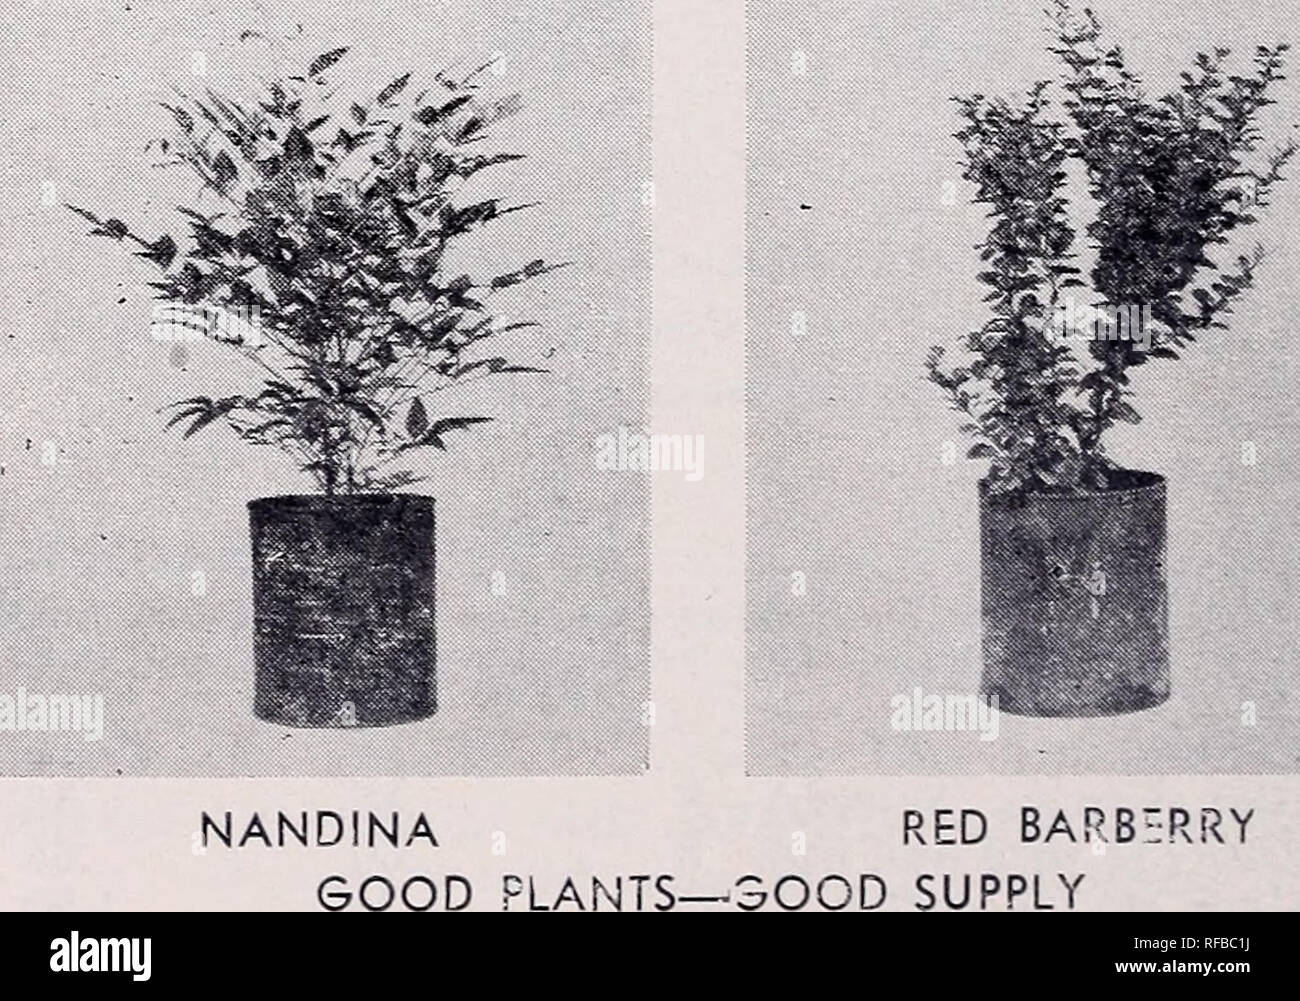 . Catalogue : 1953 - 1954. Nurseries (Horticulture) Catalogs; Nursery stock Catalogs; Evergreens Catalogs; Trees Catalogs; Shrubs Catalogs; Climbing plants Catalogs; Junipers Catalogs; Conifers Catalogs. HUME HOLLY AND MAGNOLIA LINERS Percentage and uniformity of growth mak-es potted liners the best buy. Mahonia bealei LEATHERLEAF MAHONIA Great popularity has caused buying in advance of this plant. As a result all stock is sold since January 1953. Every effort to obtain more stock is being made. We may be able to provide it for you yet. Myrica cerifera SOUTHERN WAXMYRTLE BAYBERRY Leaves spicil Stock Photo